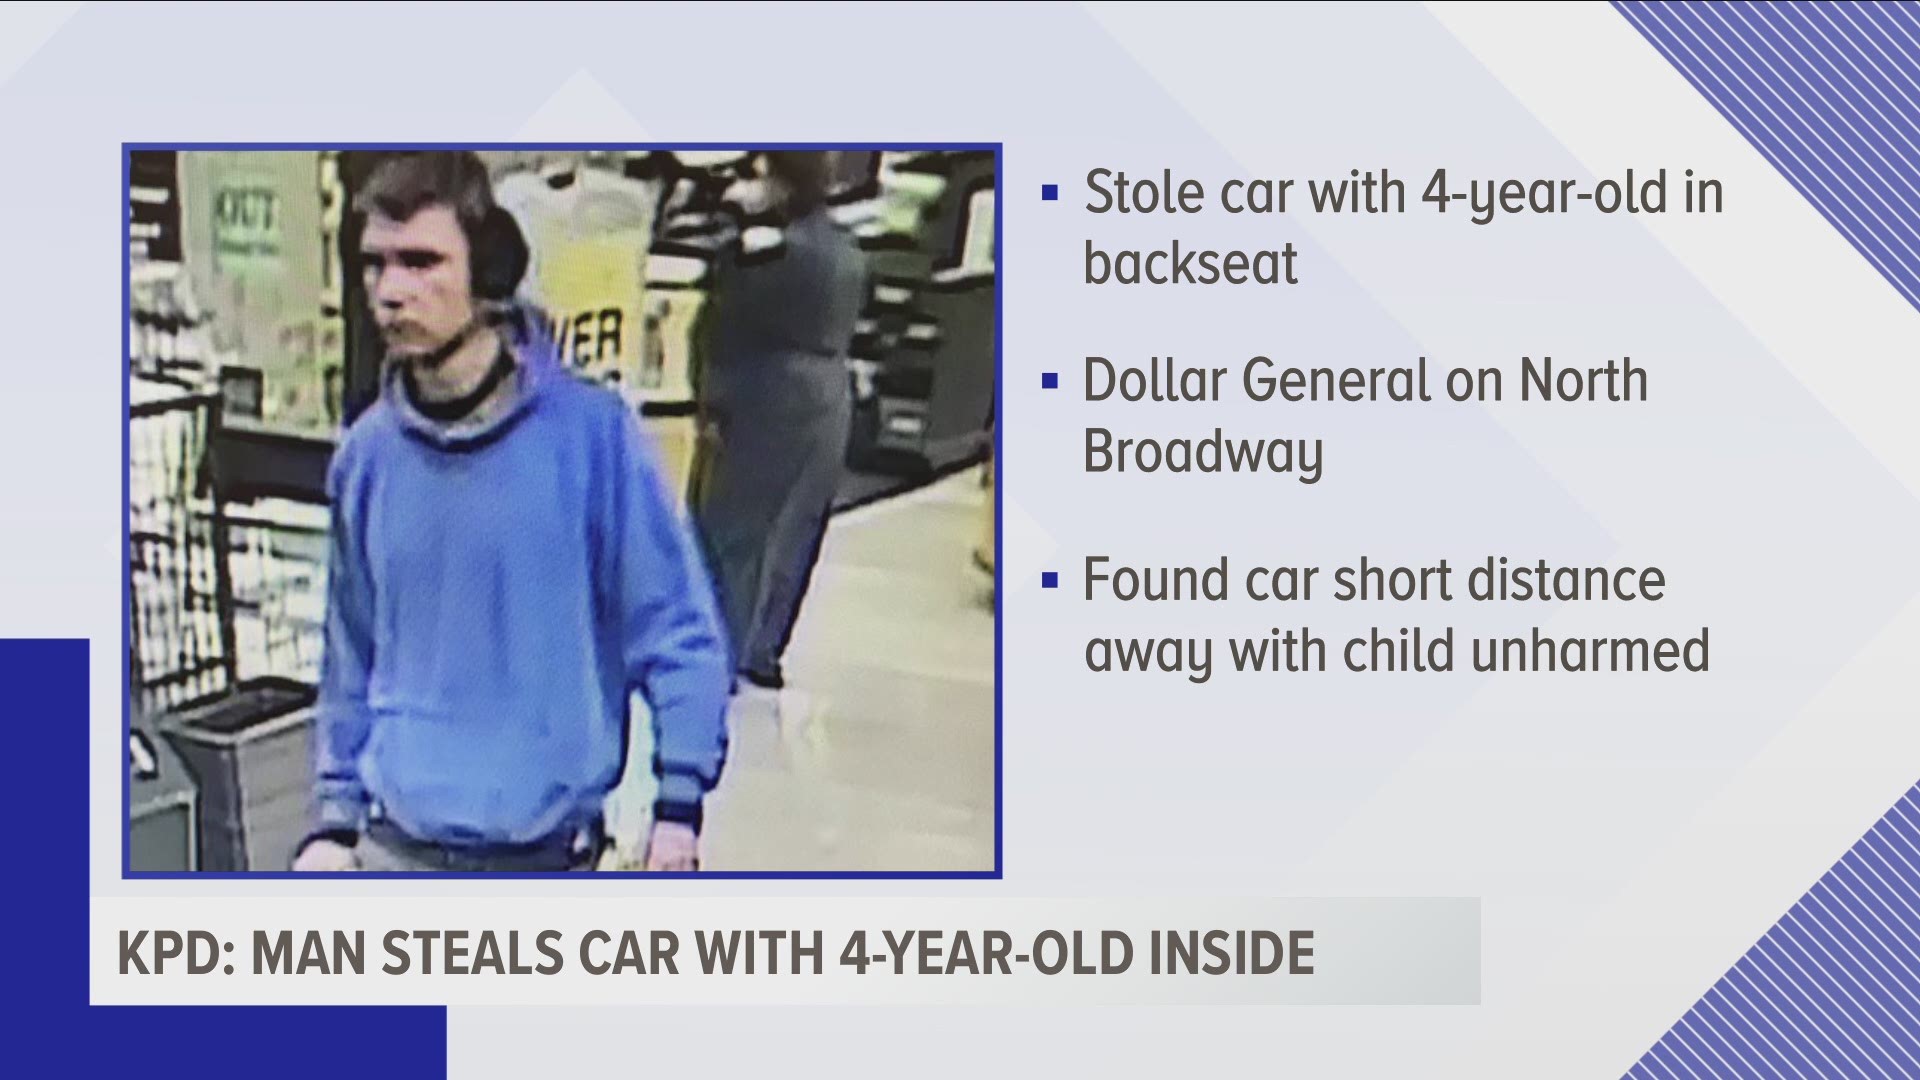 The child was found safe and unharmed with the vehicle just a few minutes after it was stolen.